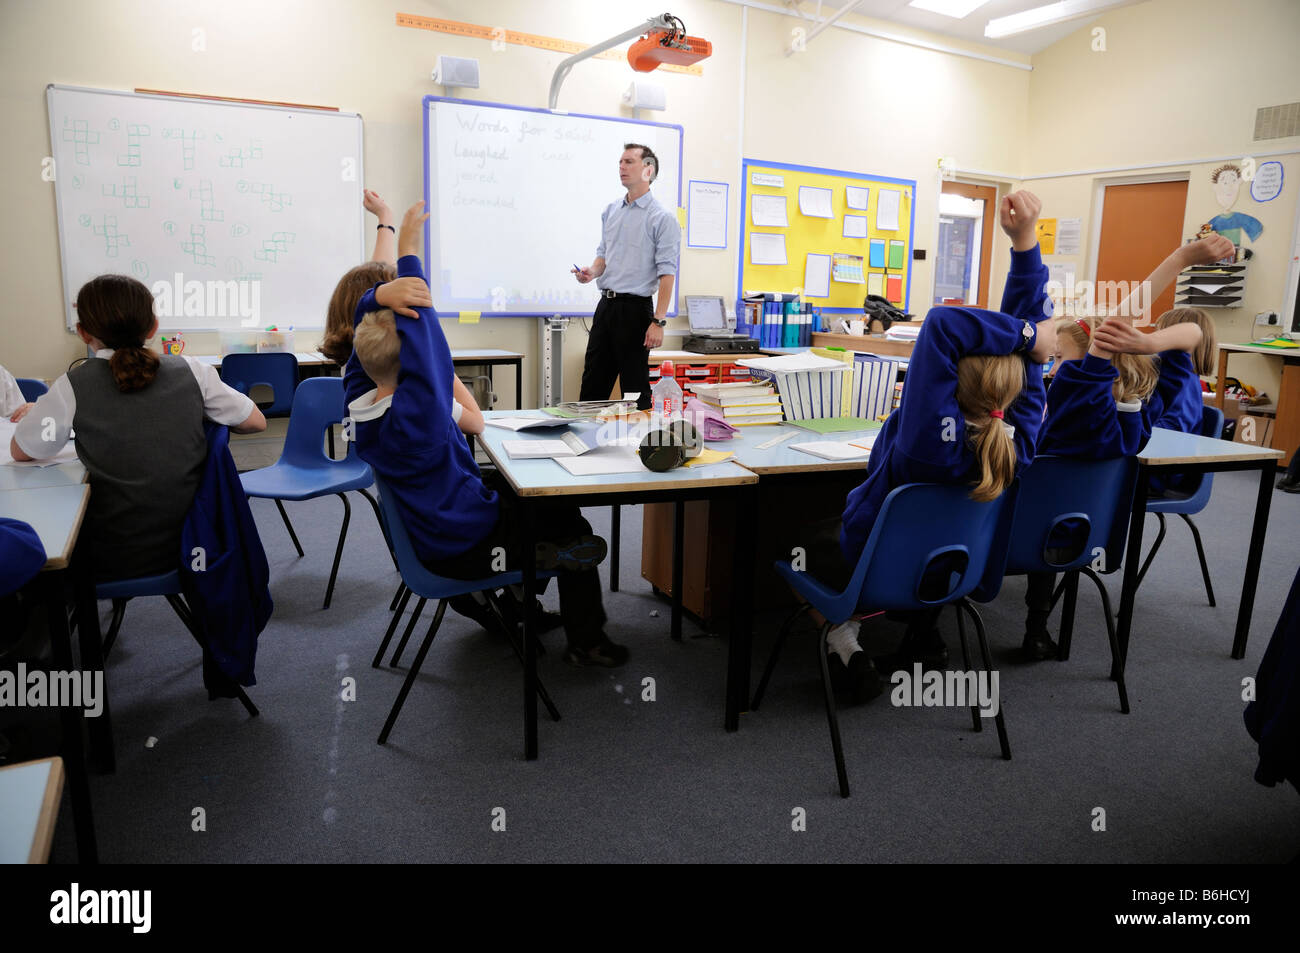 Primary school pupils working in classroom with male teacher Stock Photo